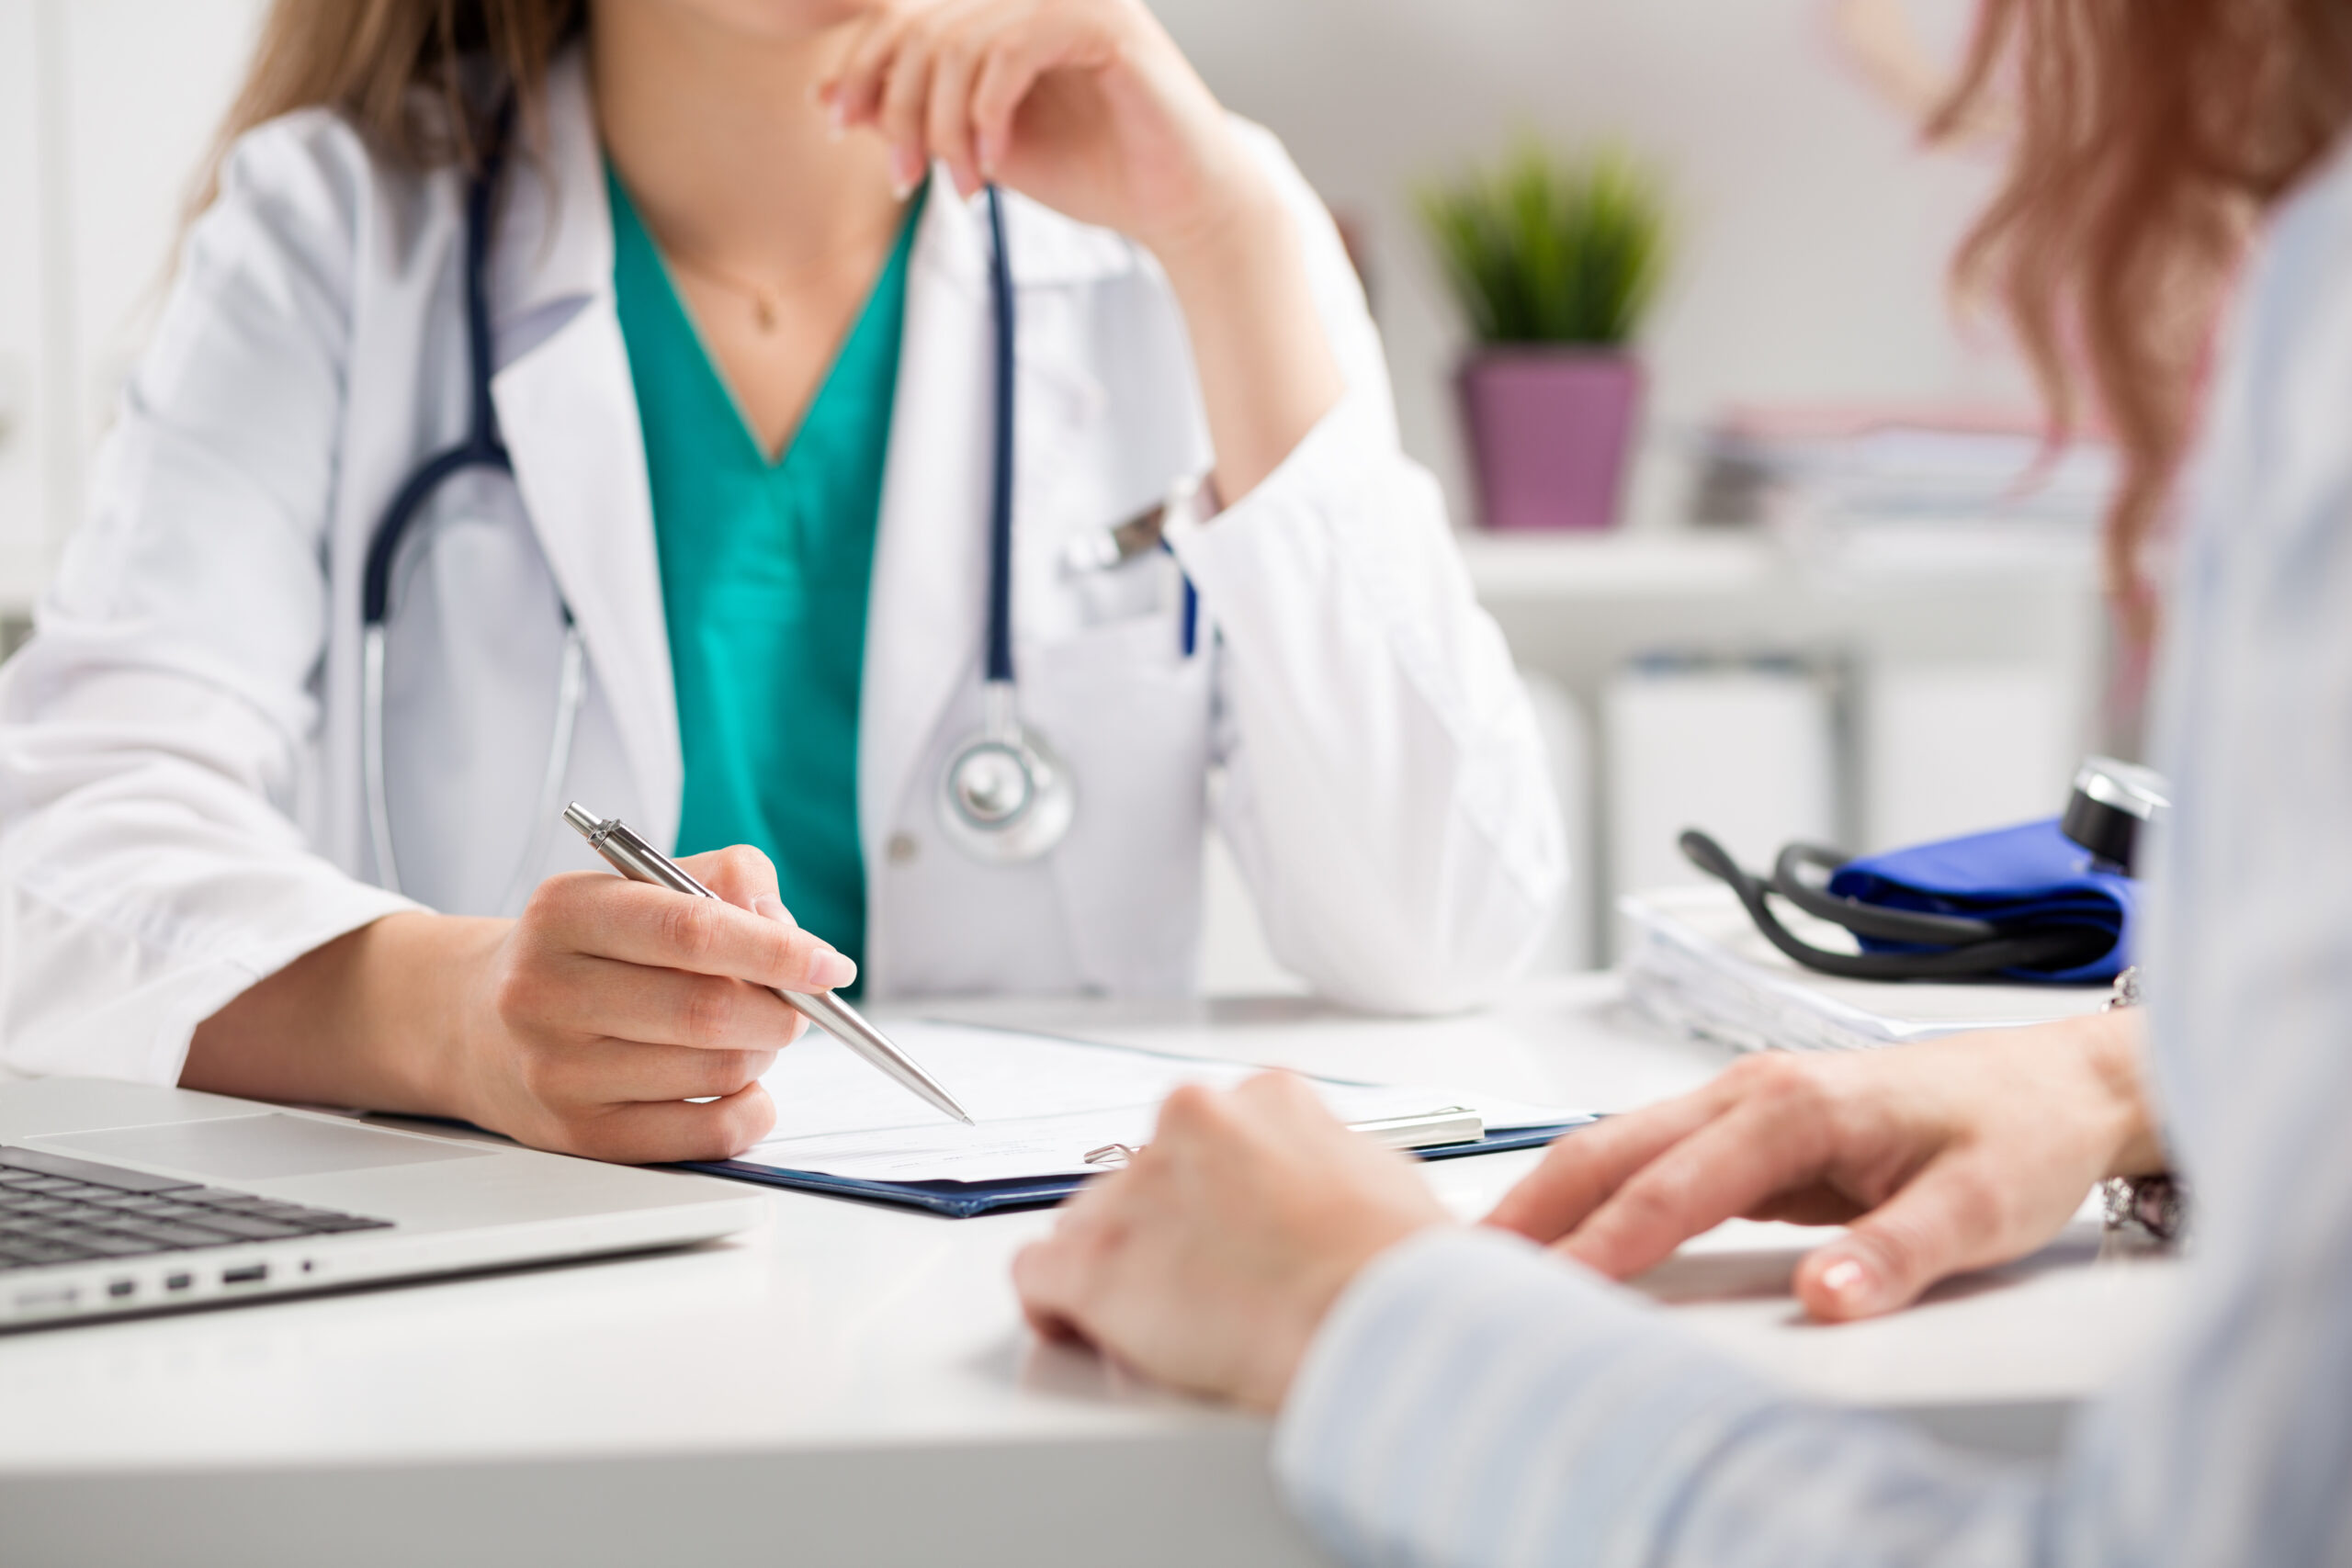 What Are the Most Common Health Concerns Doctors Address?